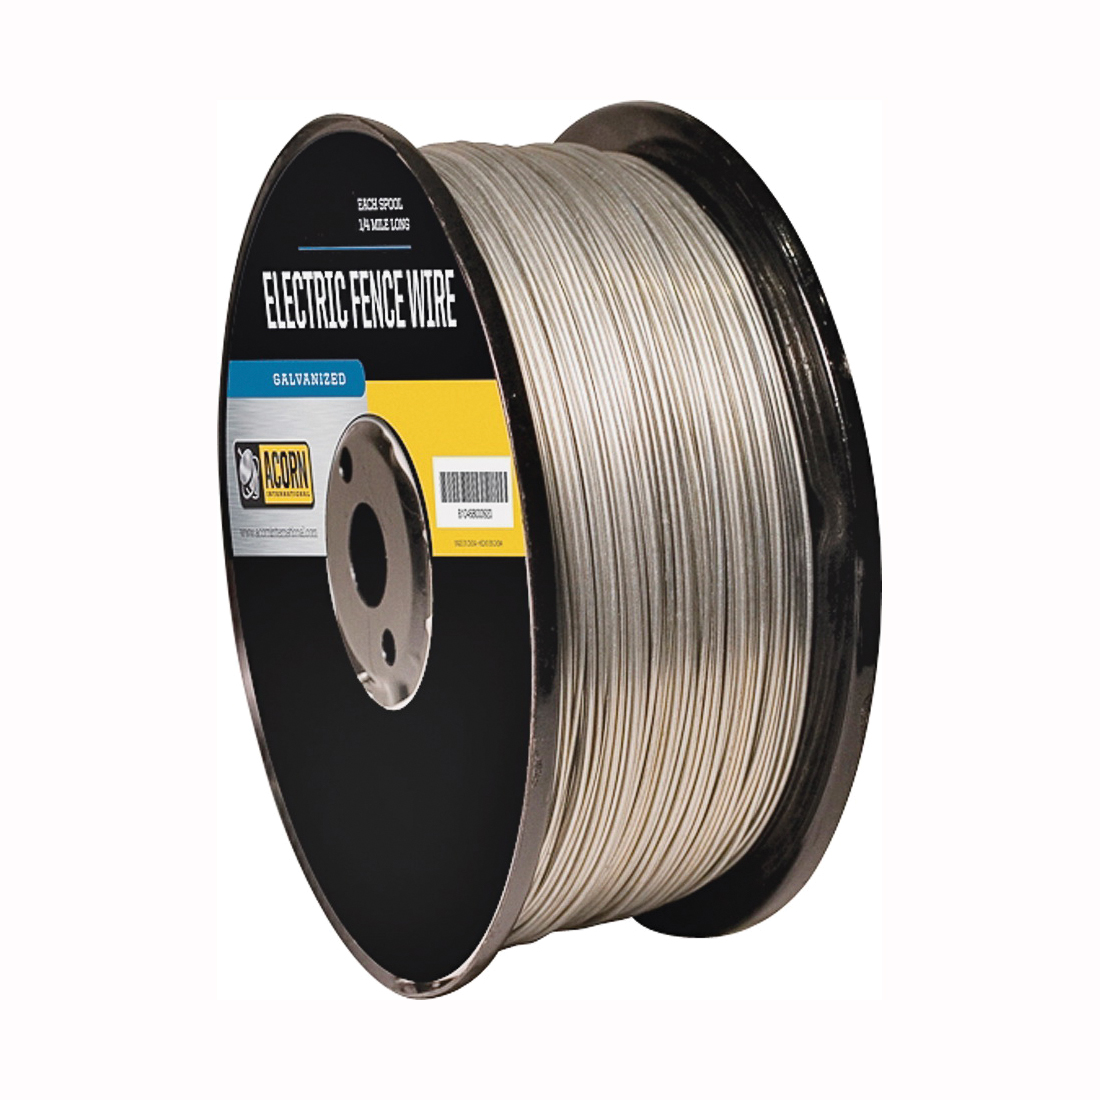 EFW1712 Electric Fence Wire, 17 ga Wire, Metal Conductor, 1/2 mile L